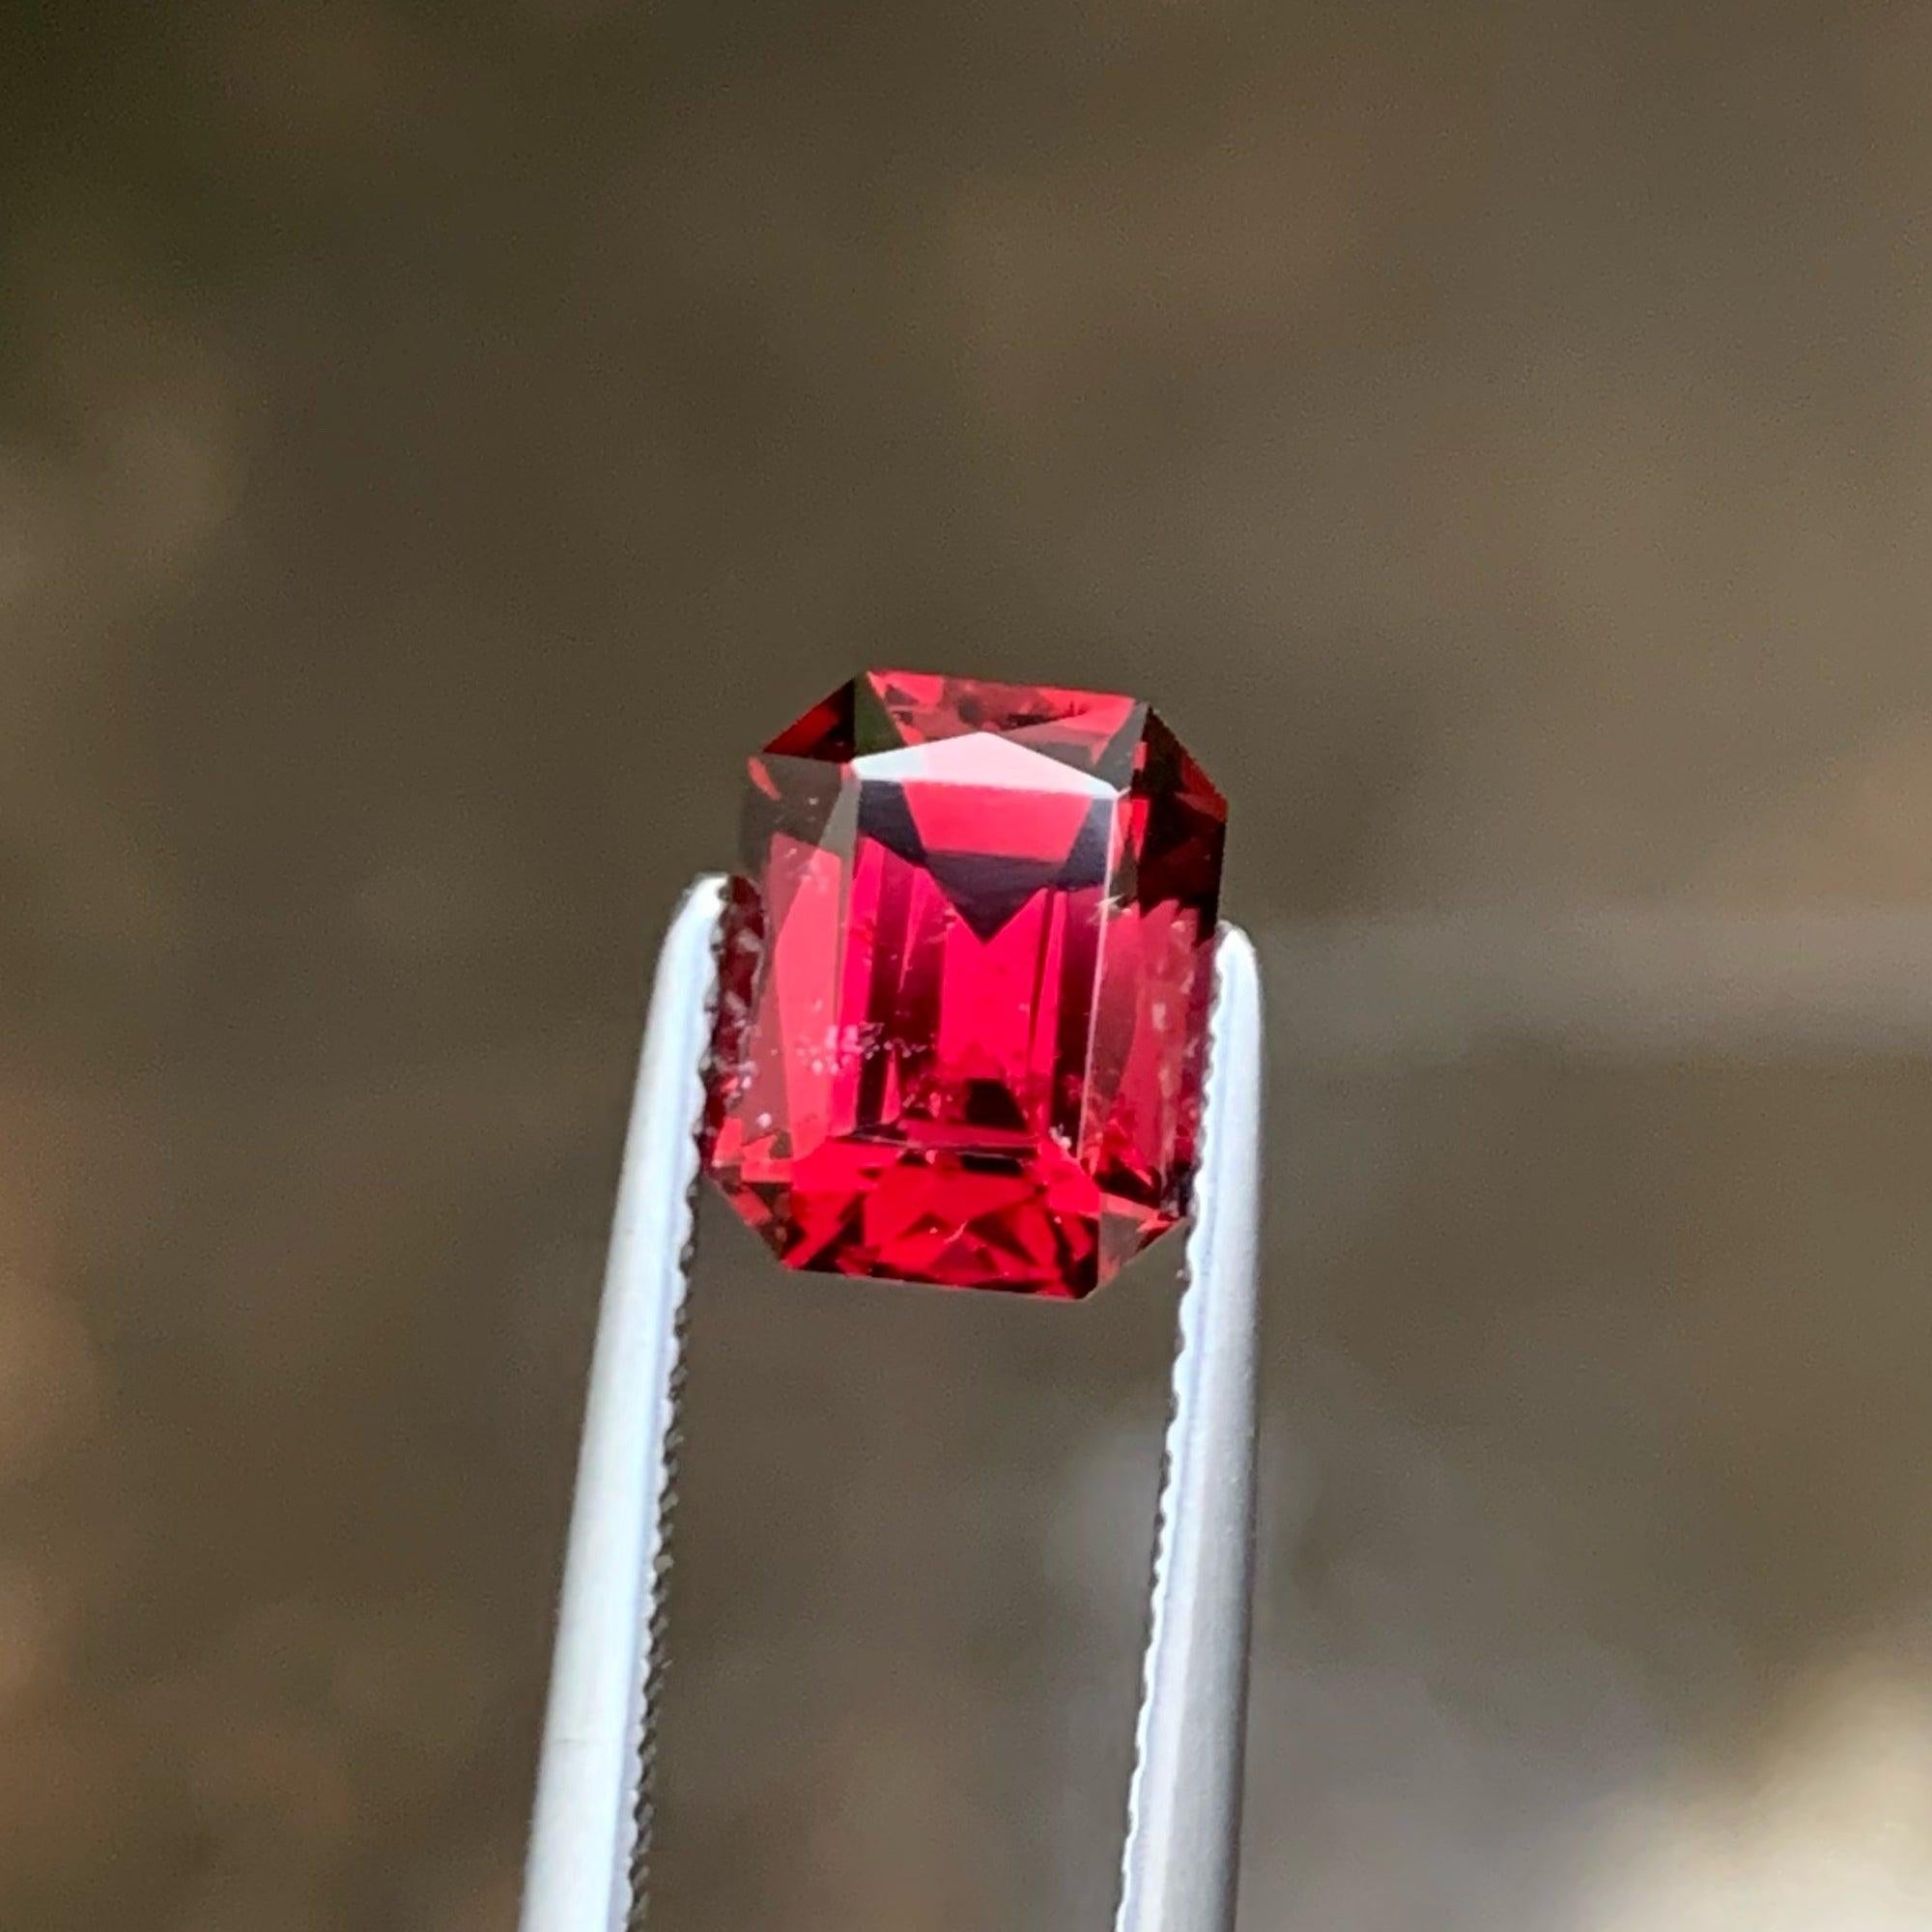 Enchanting Malawi Loose Garnet Gemstone of 2.40 carats from Malawi has a wonderful cut in a Octagon shape, incredible Red color, Great brilliance. This gem is VVS Clarity.

 

Product Information:
GEMSTONE NAME:	Enchanting Malawi Loose Garnet